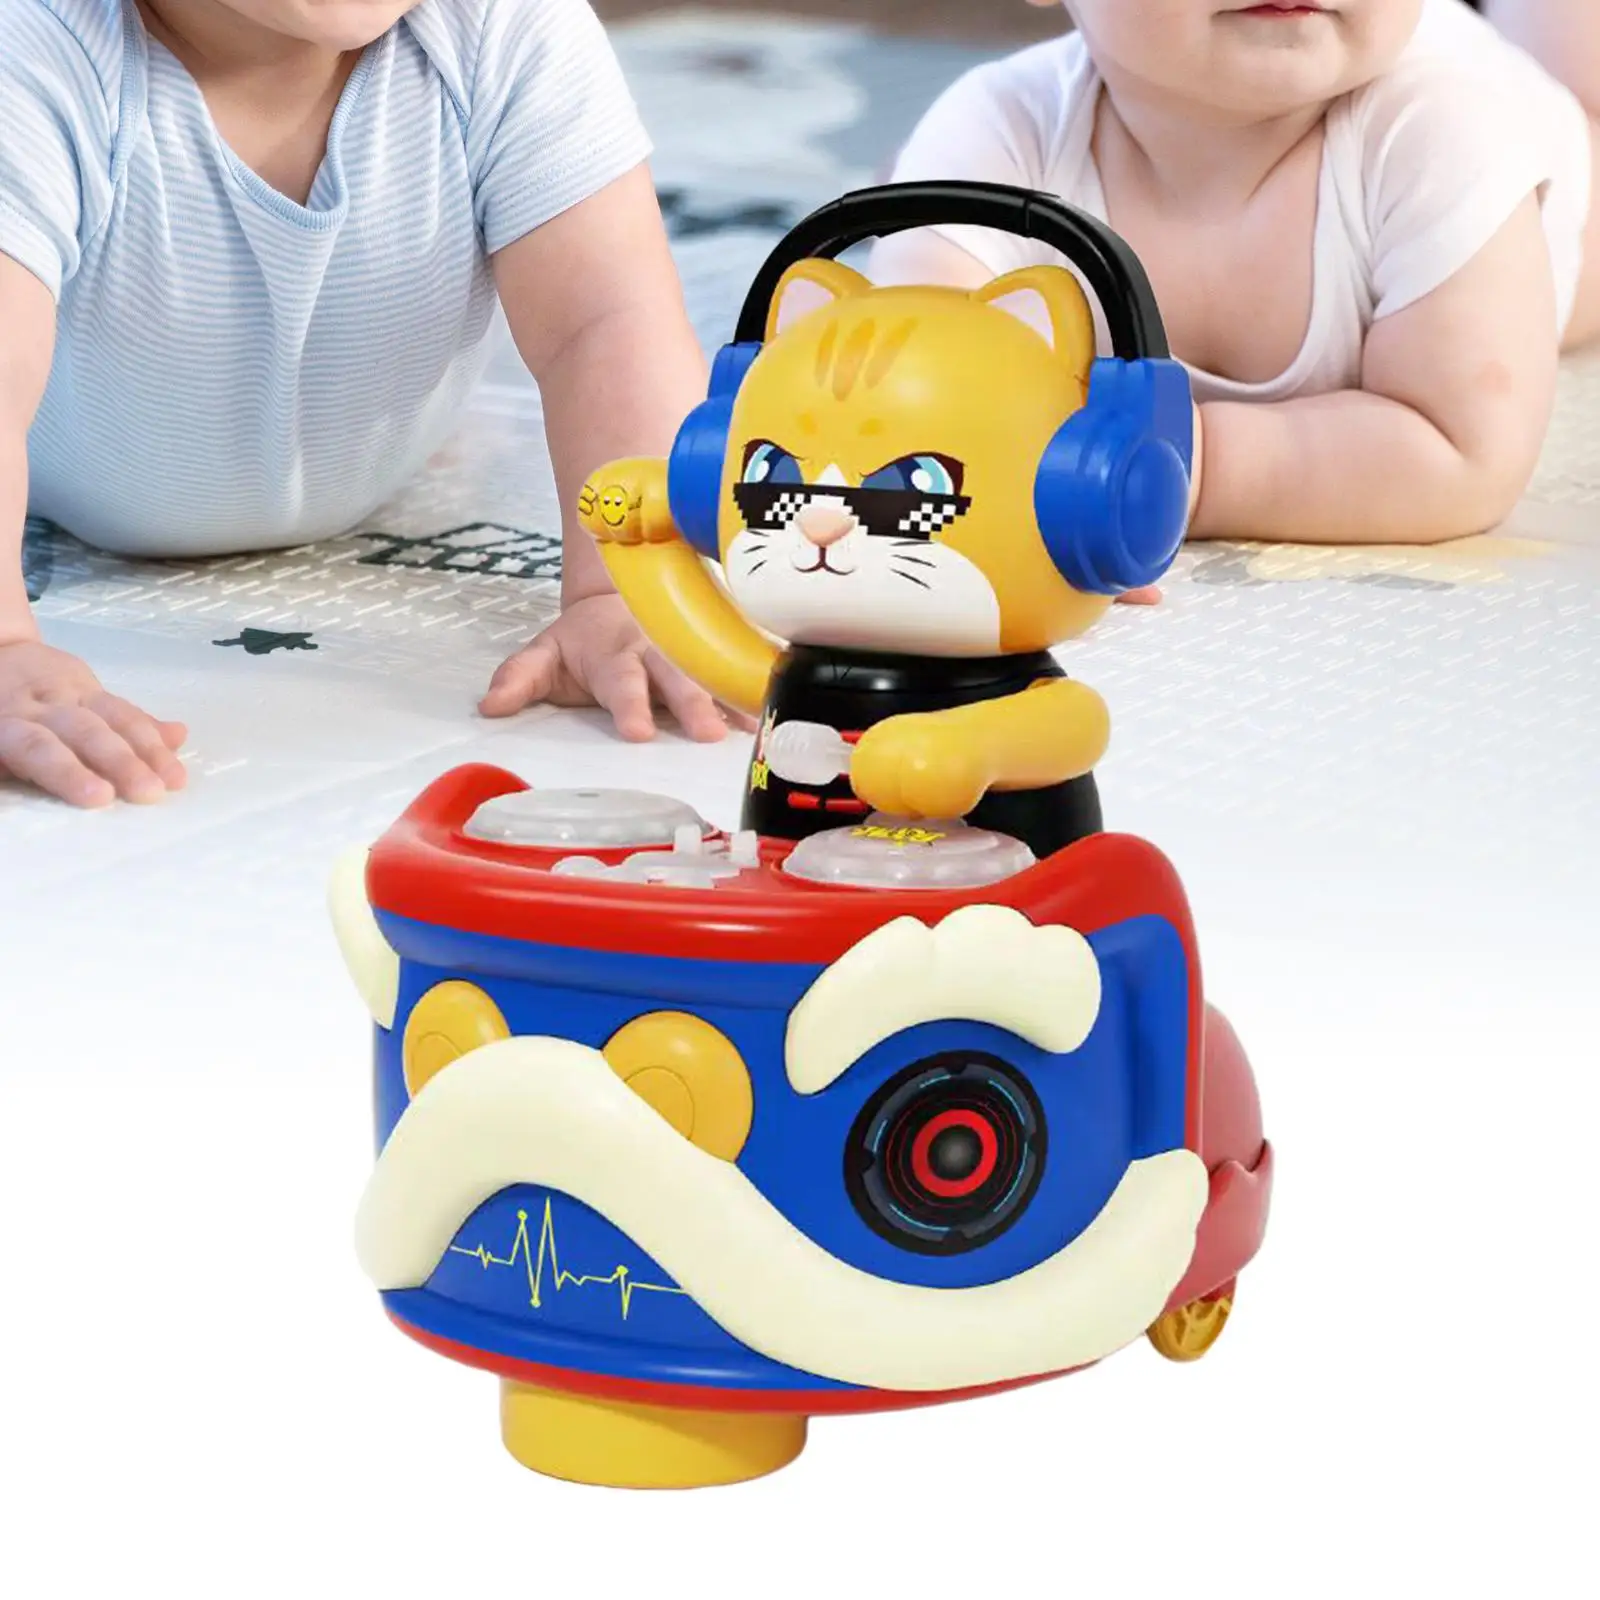 Dancing Cat Universal Wheel Baby Toy for Ages 1-3 Years Old Travel Toy Child